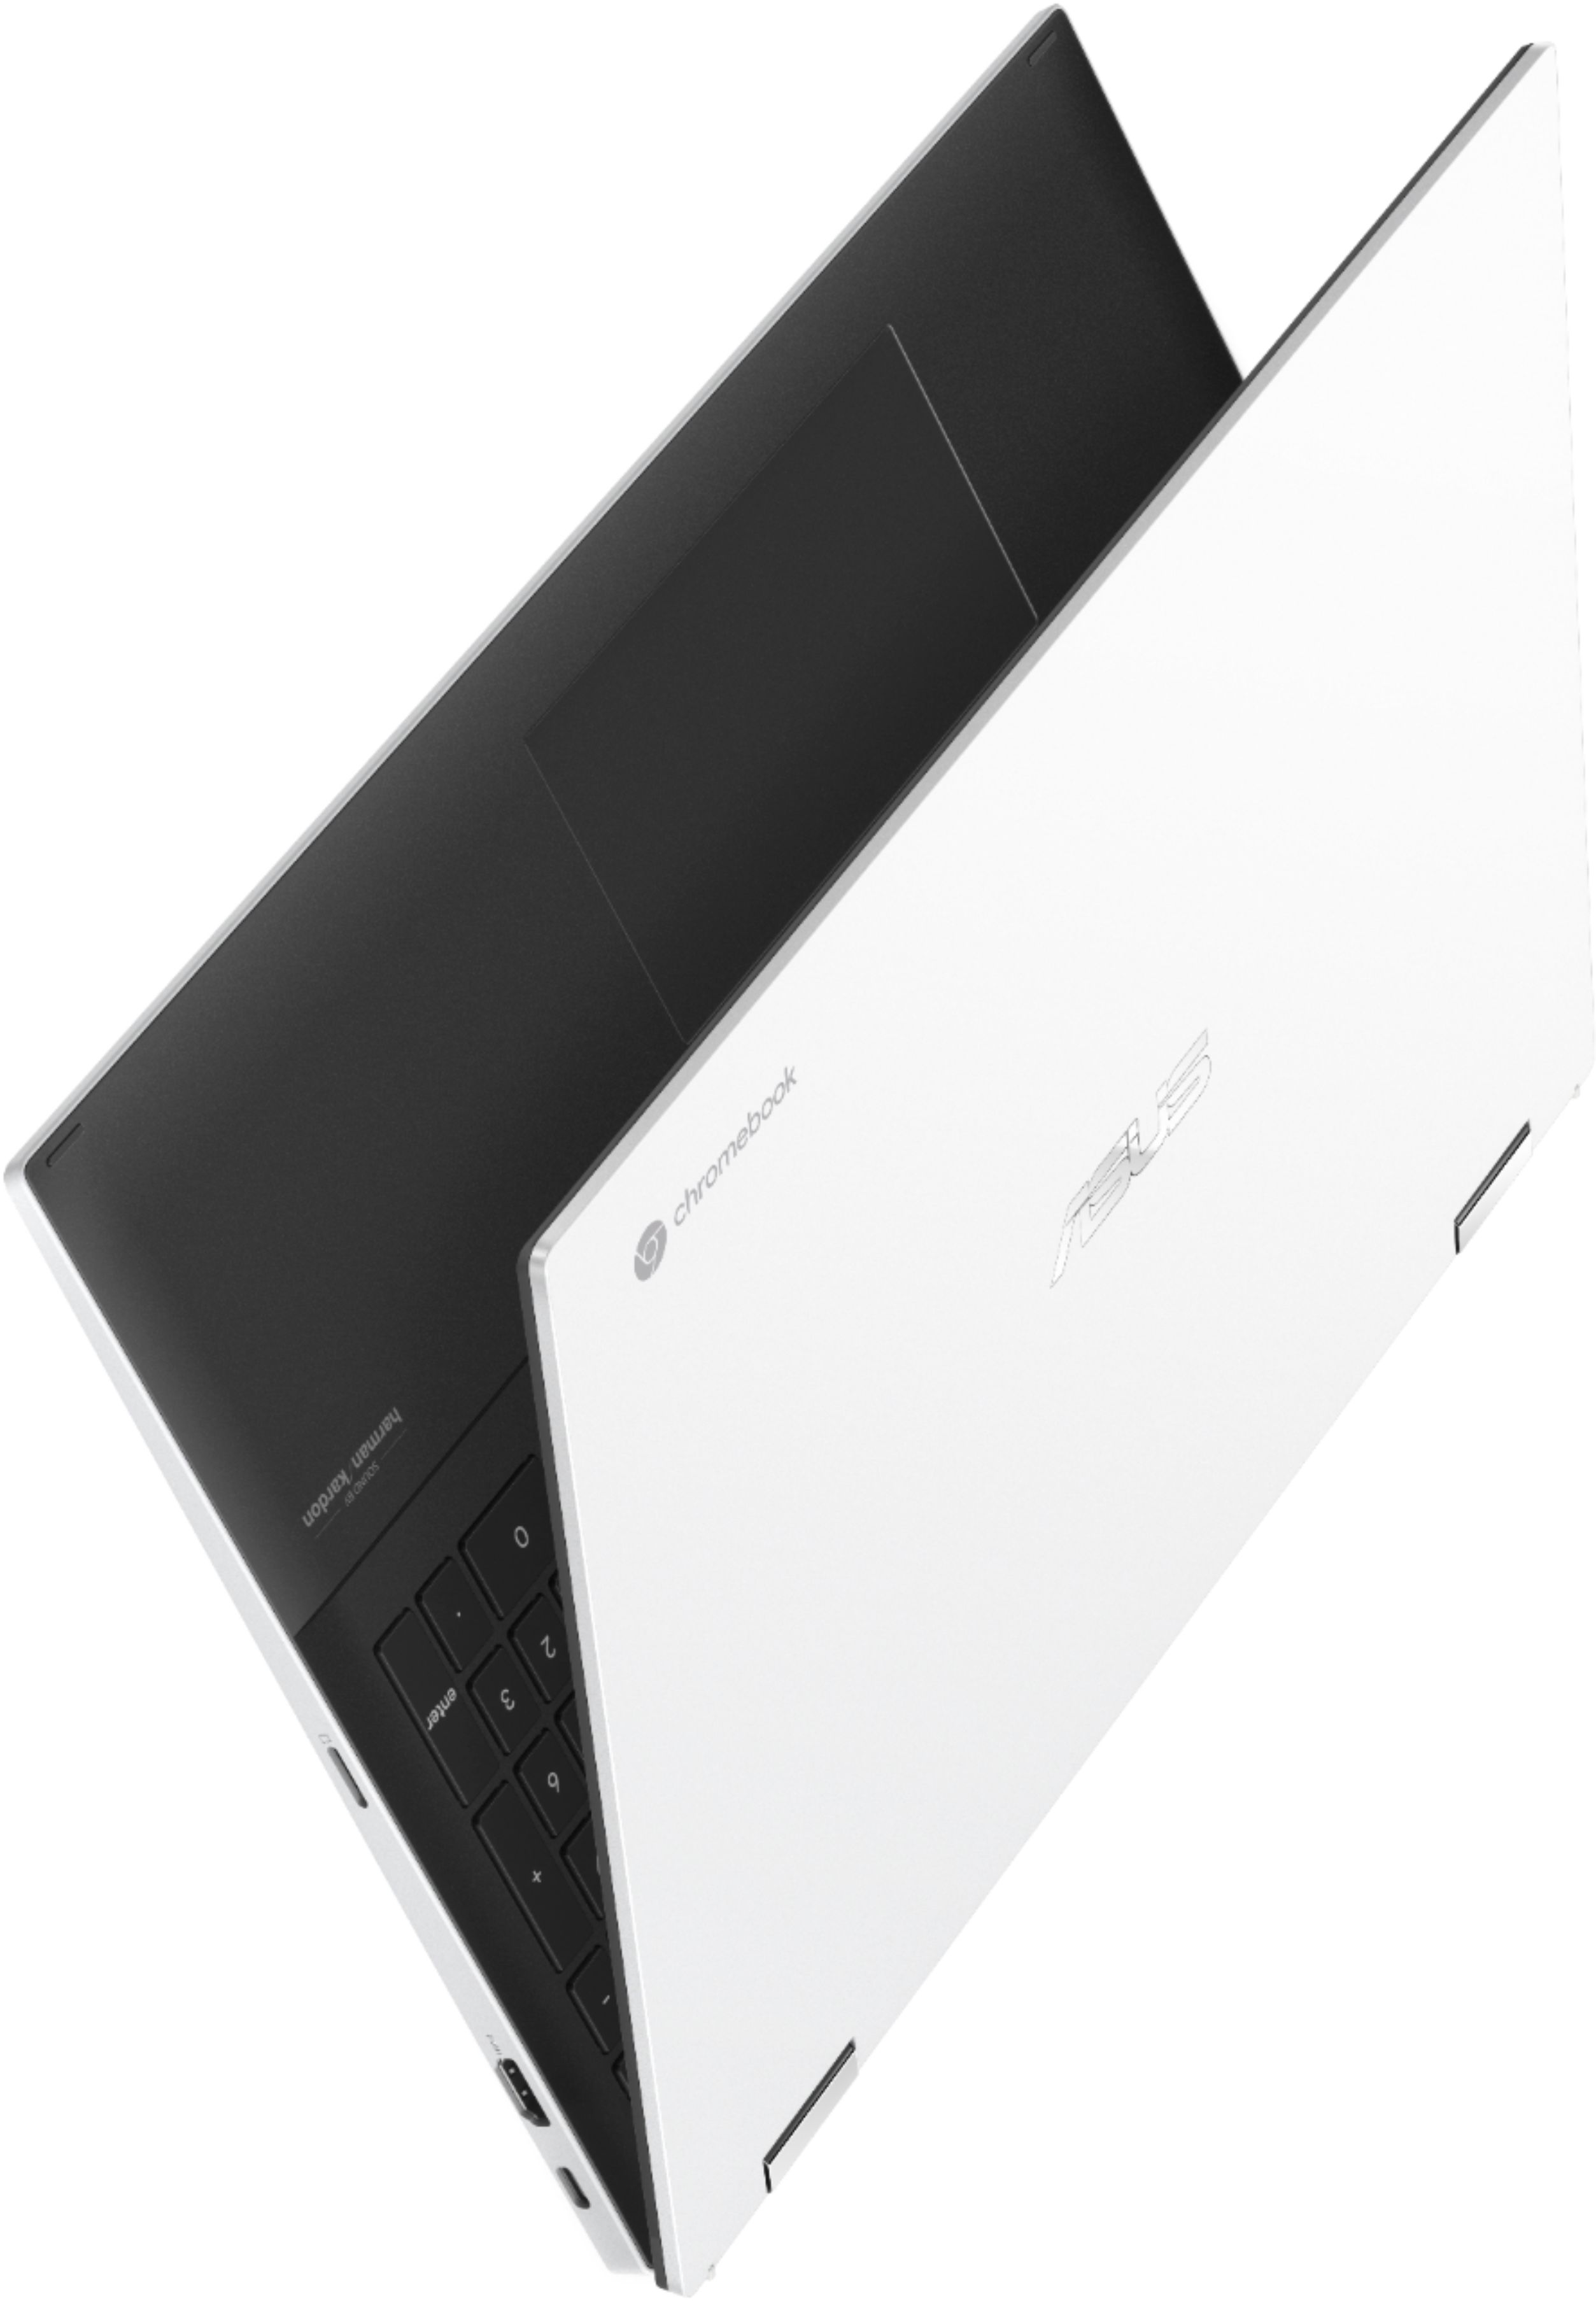 ASUS 2-in-1 15.6